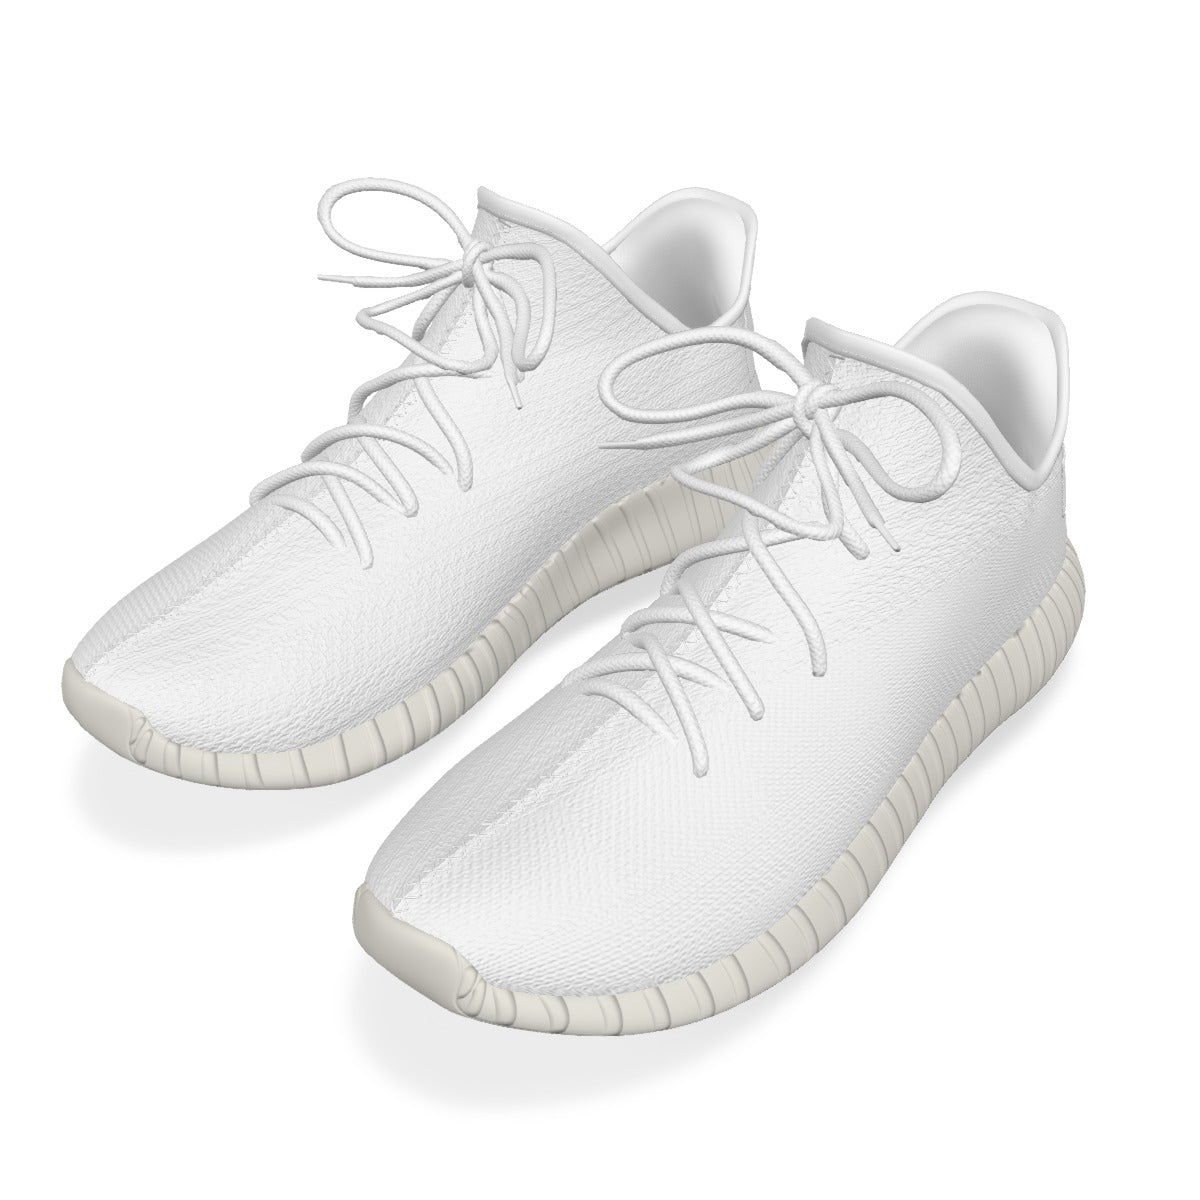 Men's Coconut White Yoga Shoes Yoga and Meditation Products - Personal Hour